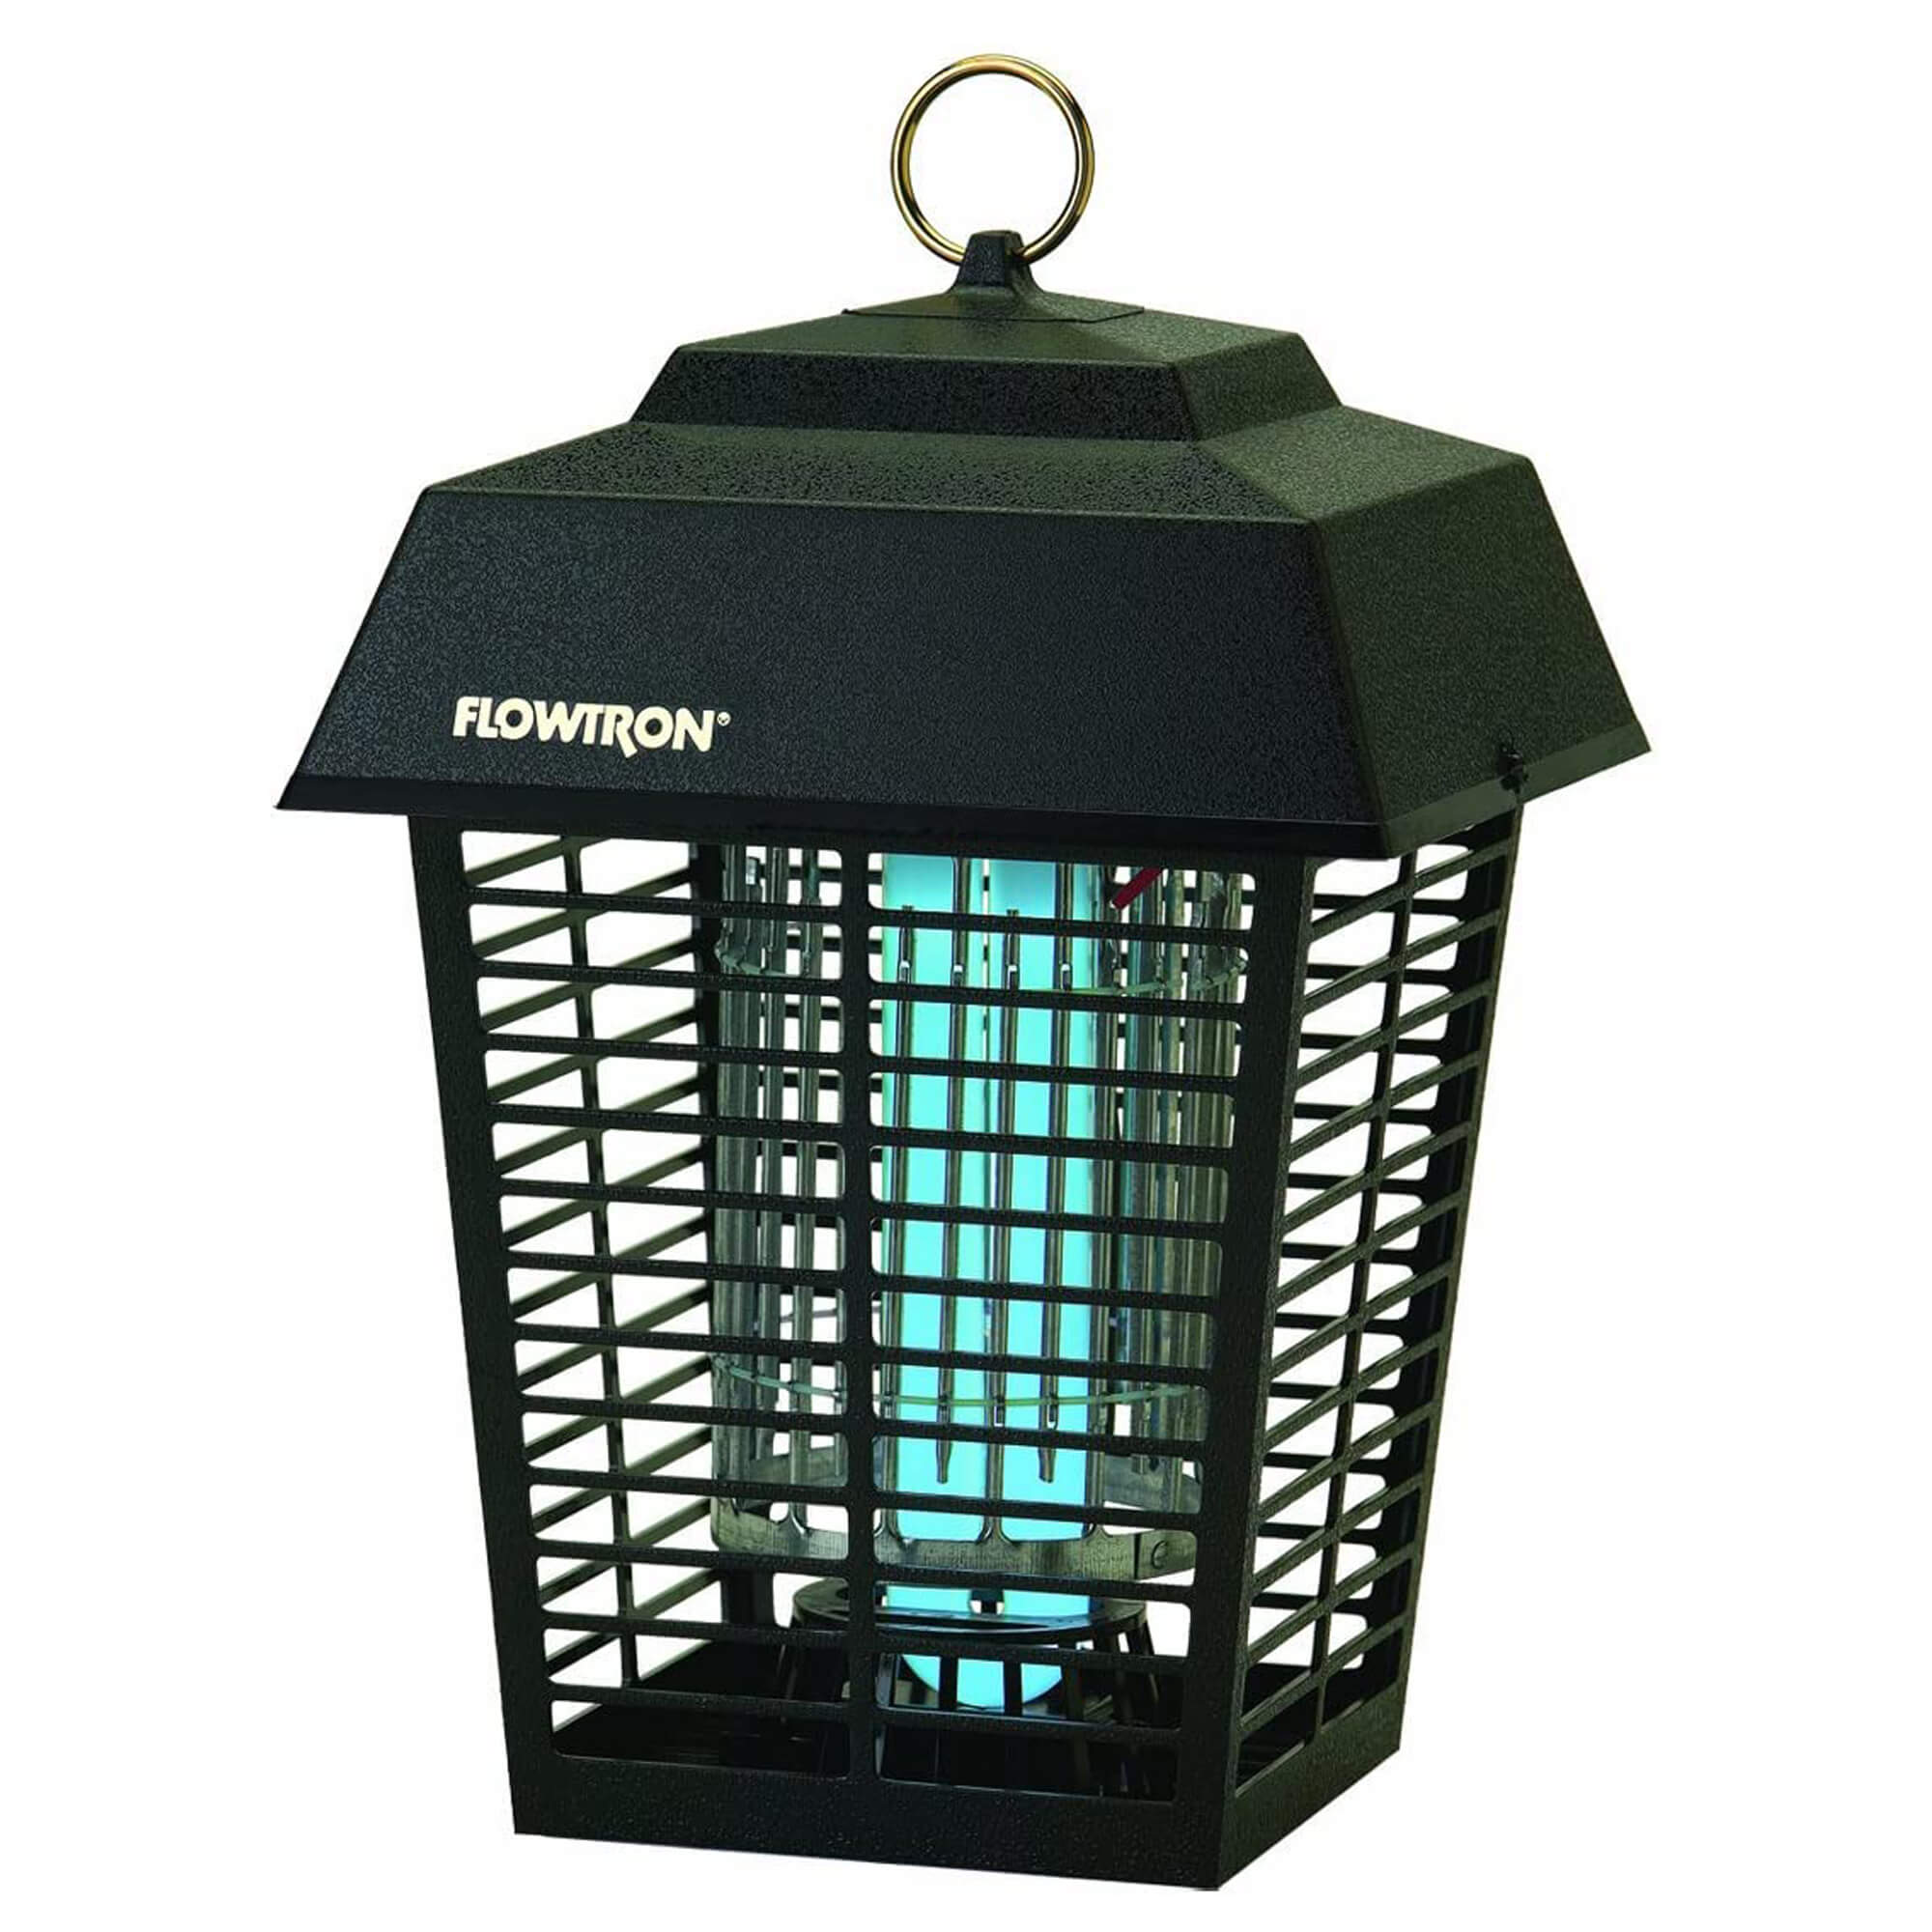 Flowtron Electronic Insect Killer / Outdoor Bug Zapper